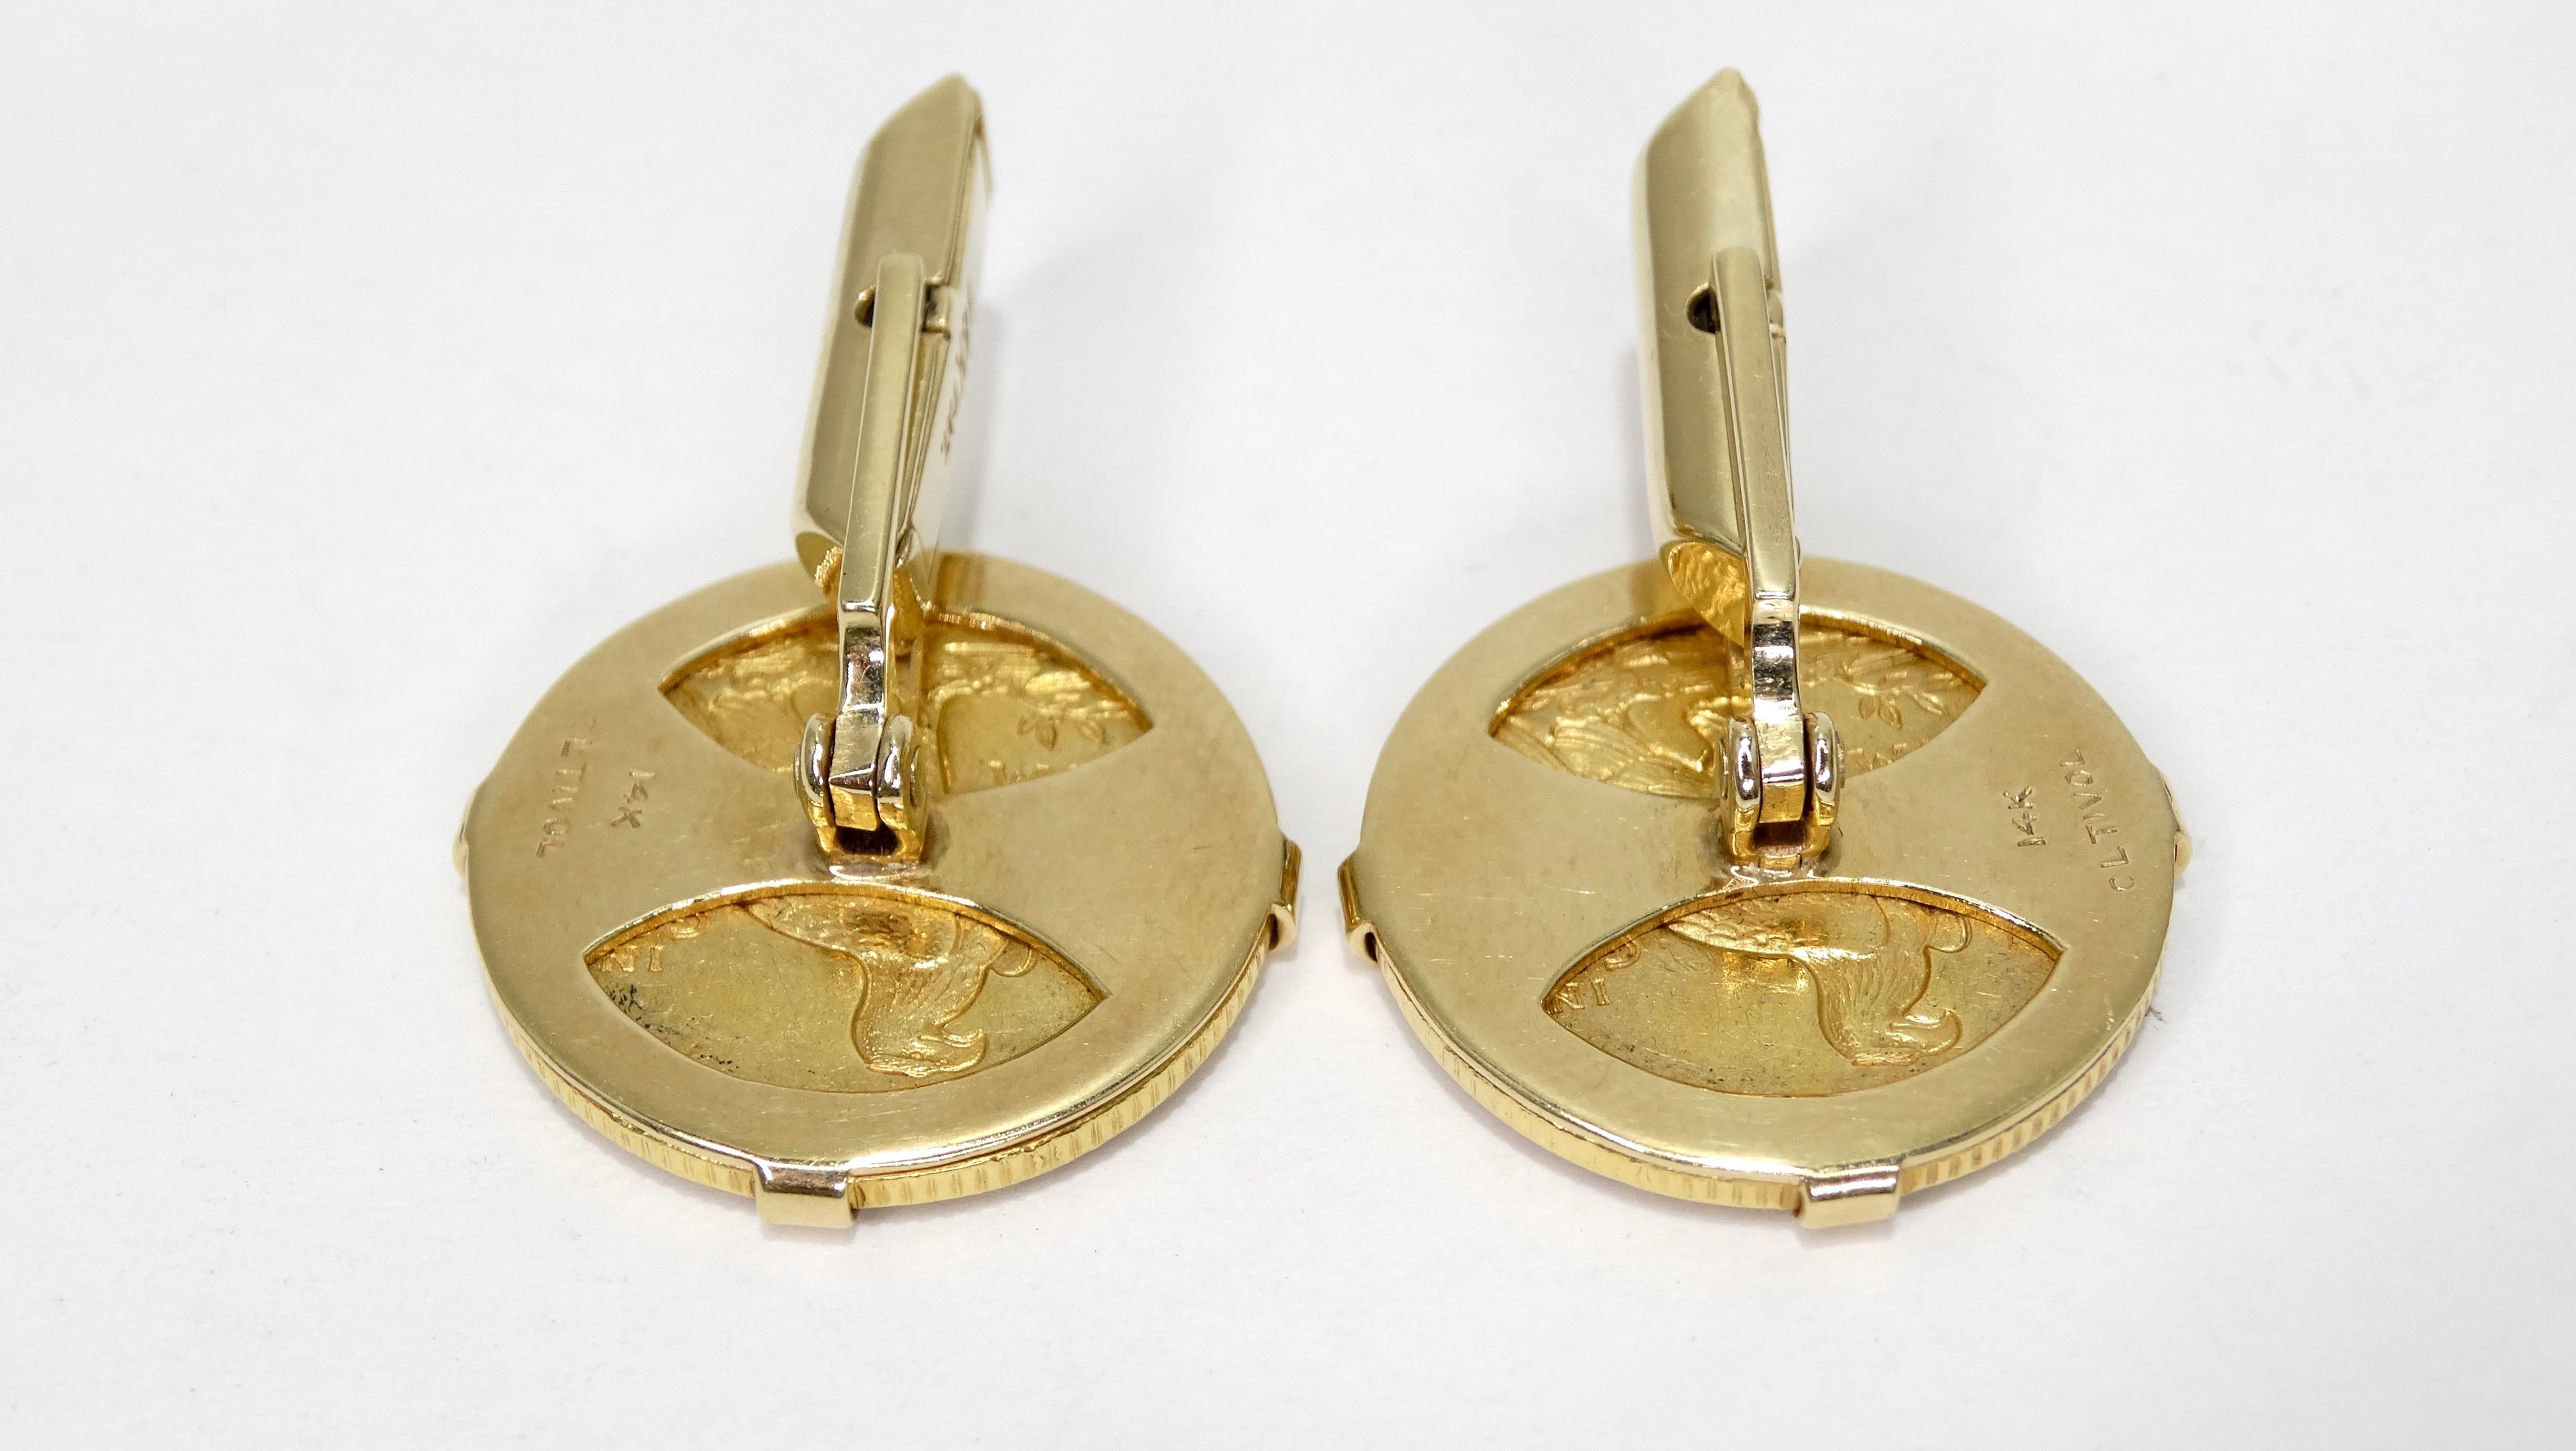 The perfect little accessory! Beautiful unisex cuff links featuring the 1911- D Indian Head $2.50 Coin wrapped in 14K gold hardware. The coin itself features the head of an Indian, 6 stars on each side, and engraved with 